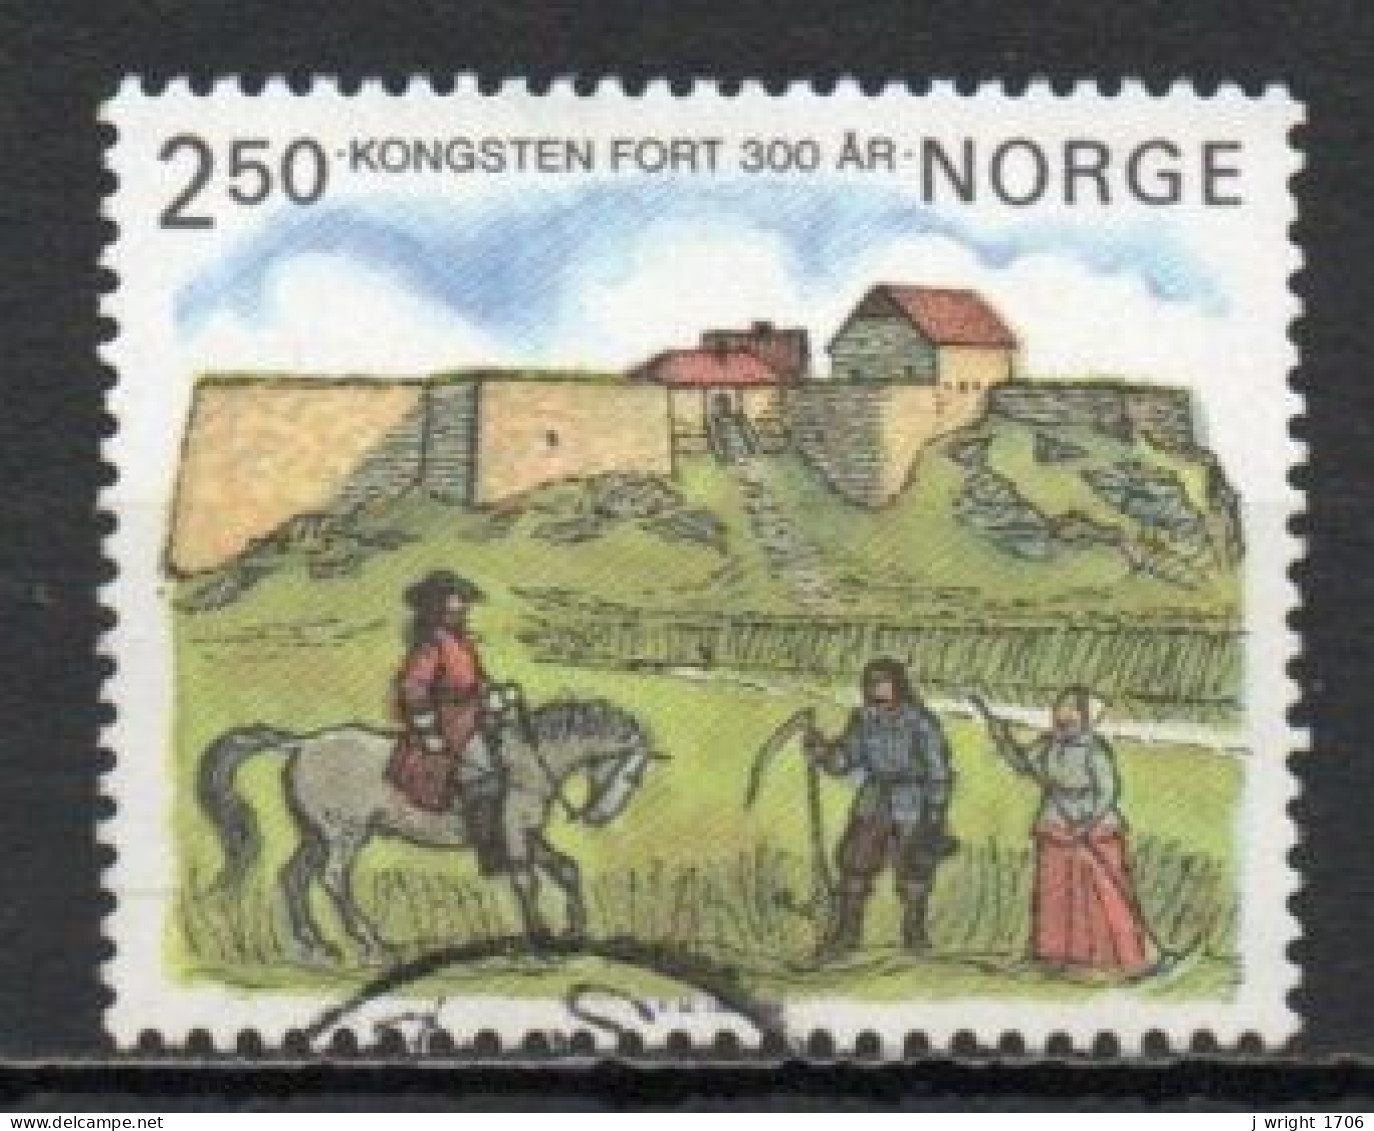 Norway, 1985, Kongsten Fort 300th Anniv, Set, USED - Used Stamps